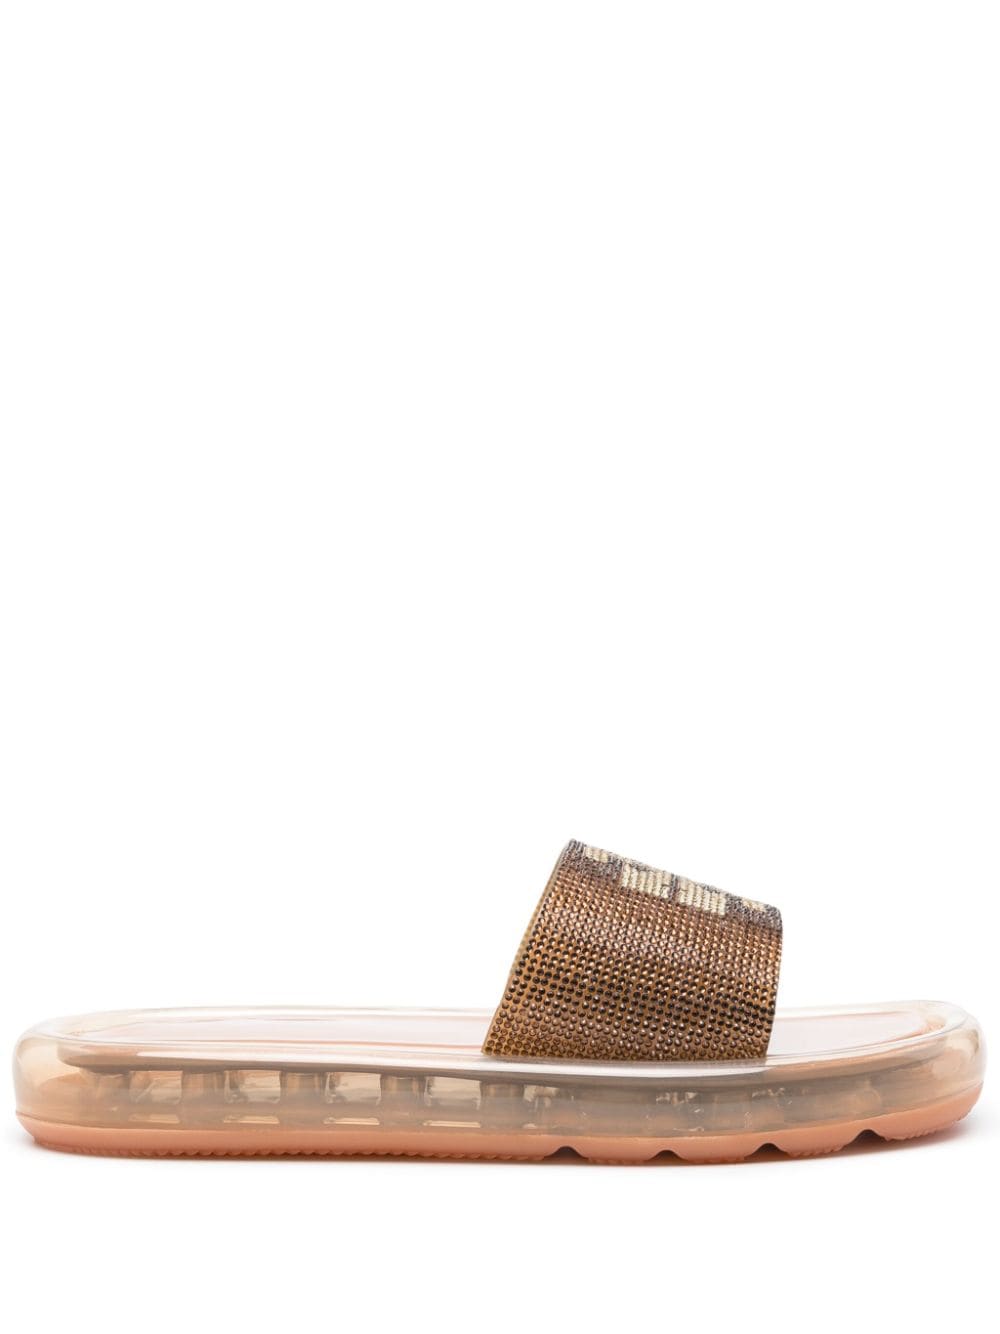 Tory Burch Bubble Jelly crystal-embellished slides - Neutrals von Tory Burch